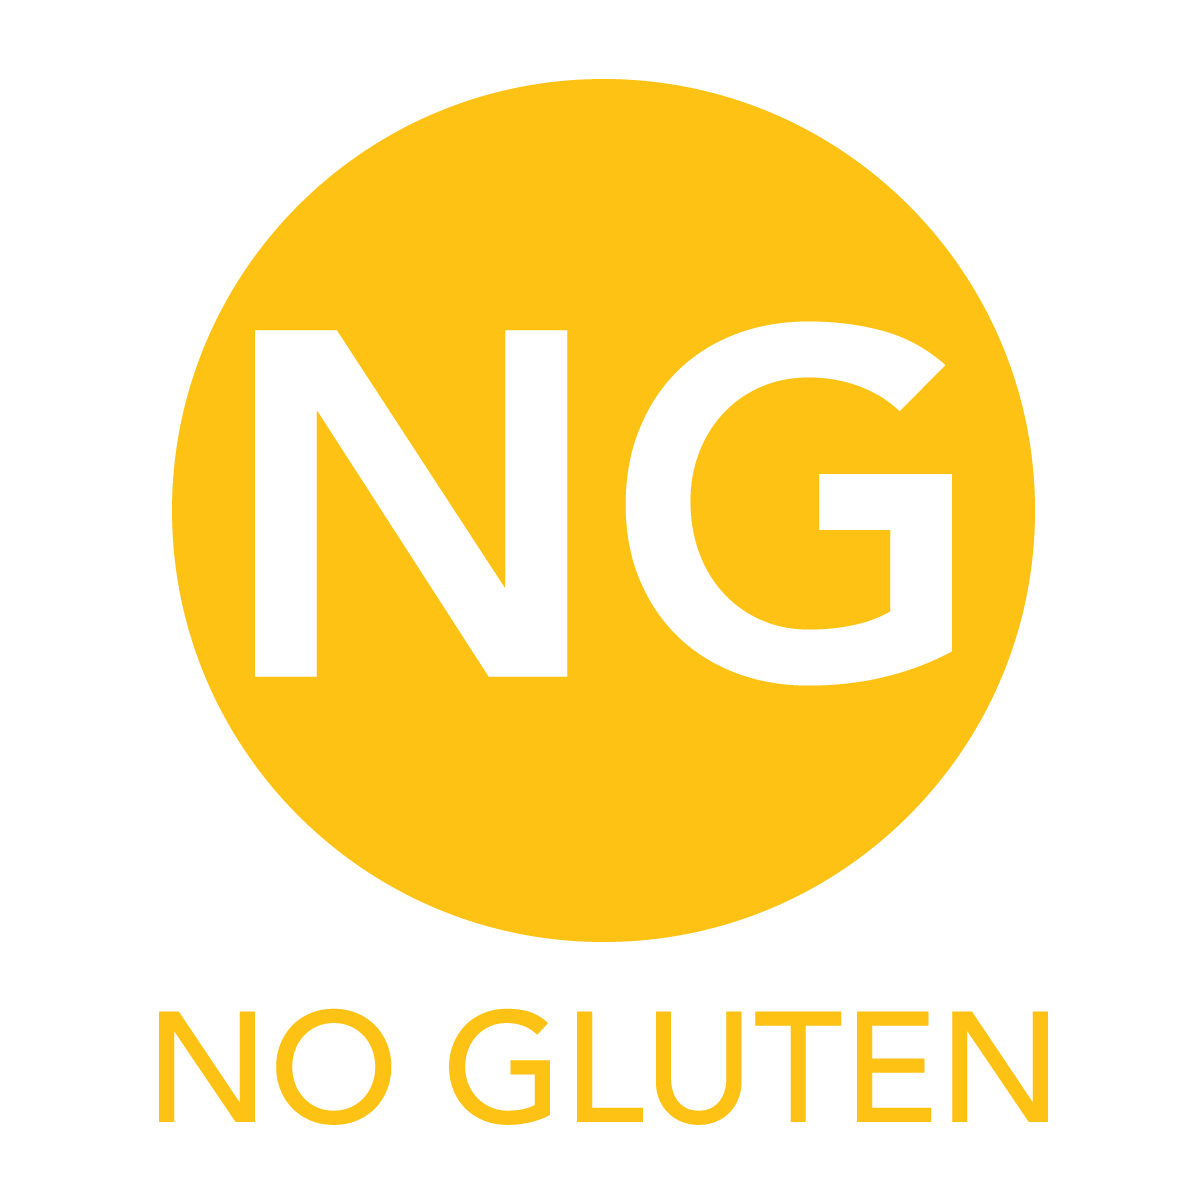 gluten-free-icon-2022.png